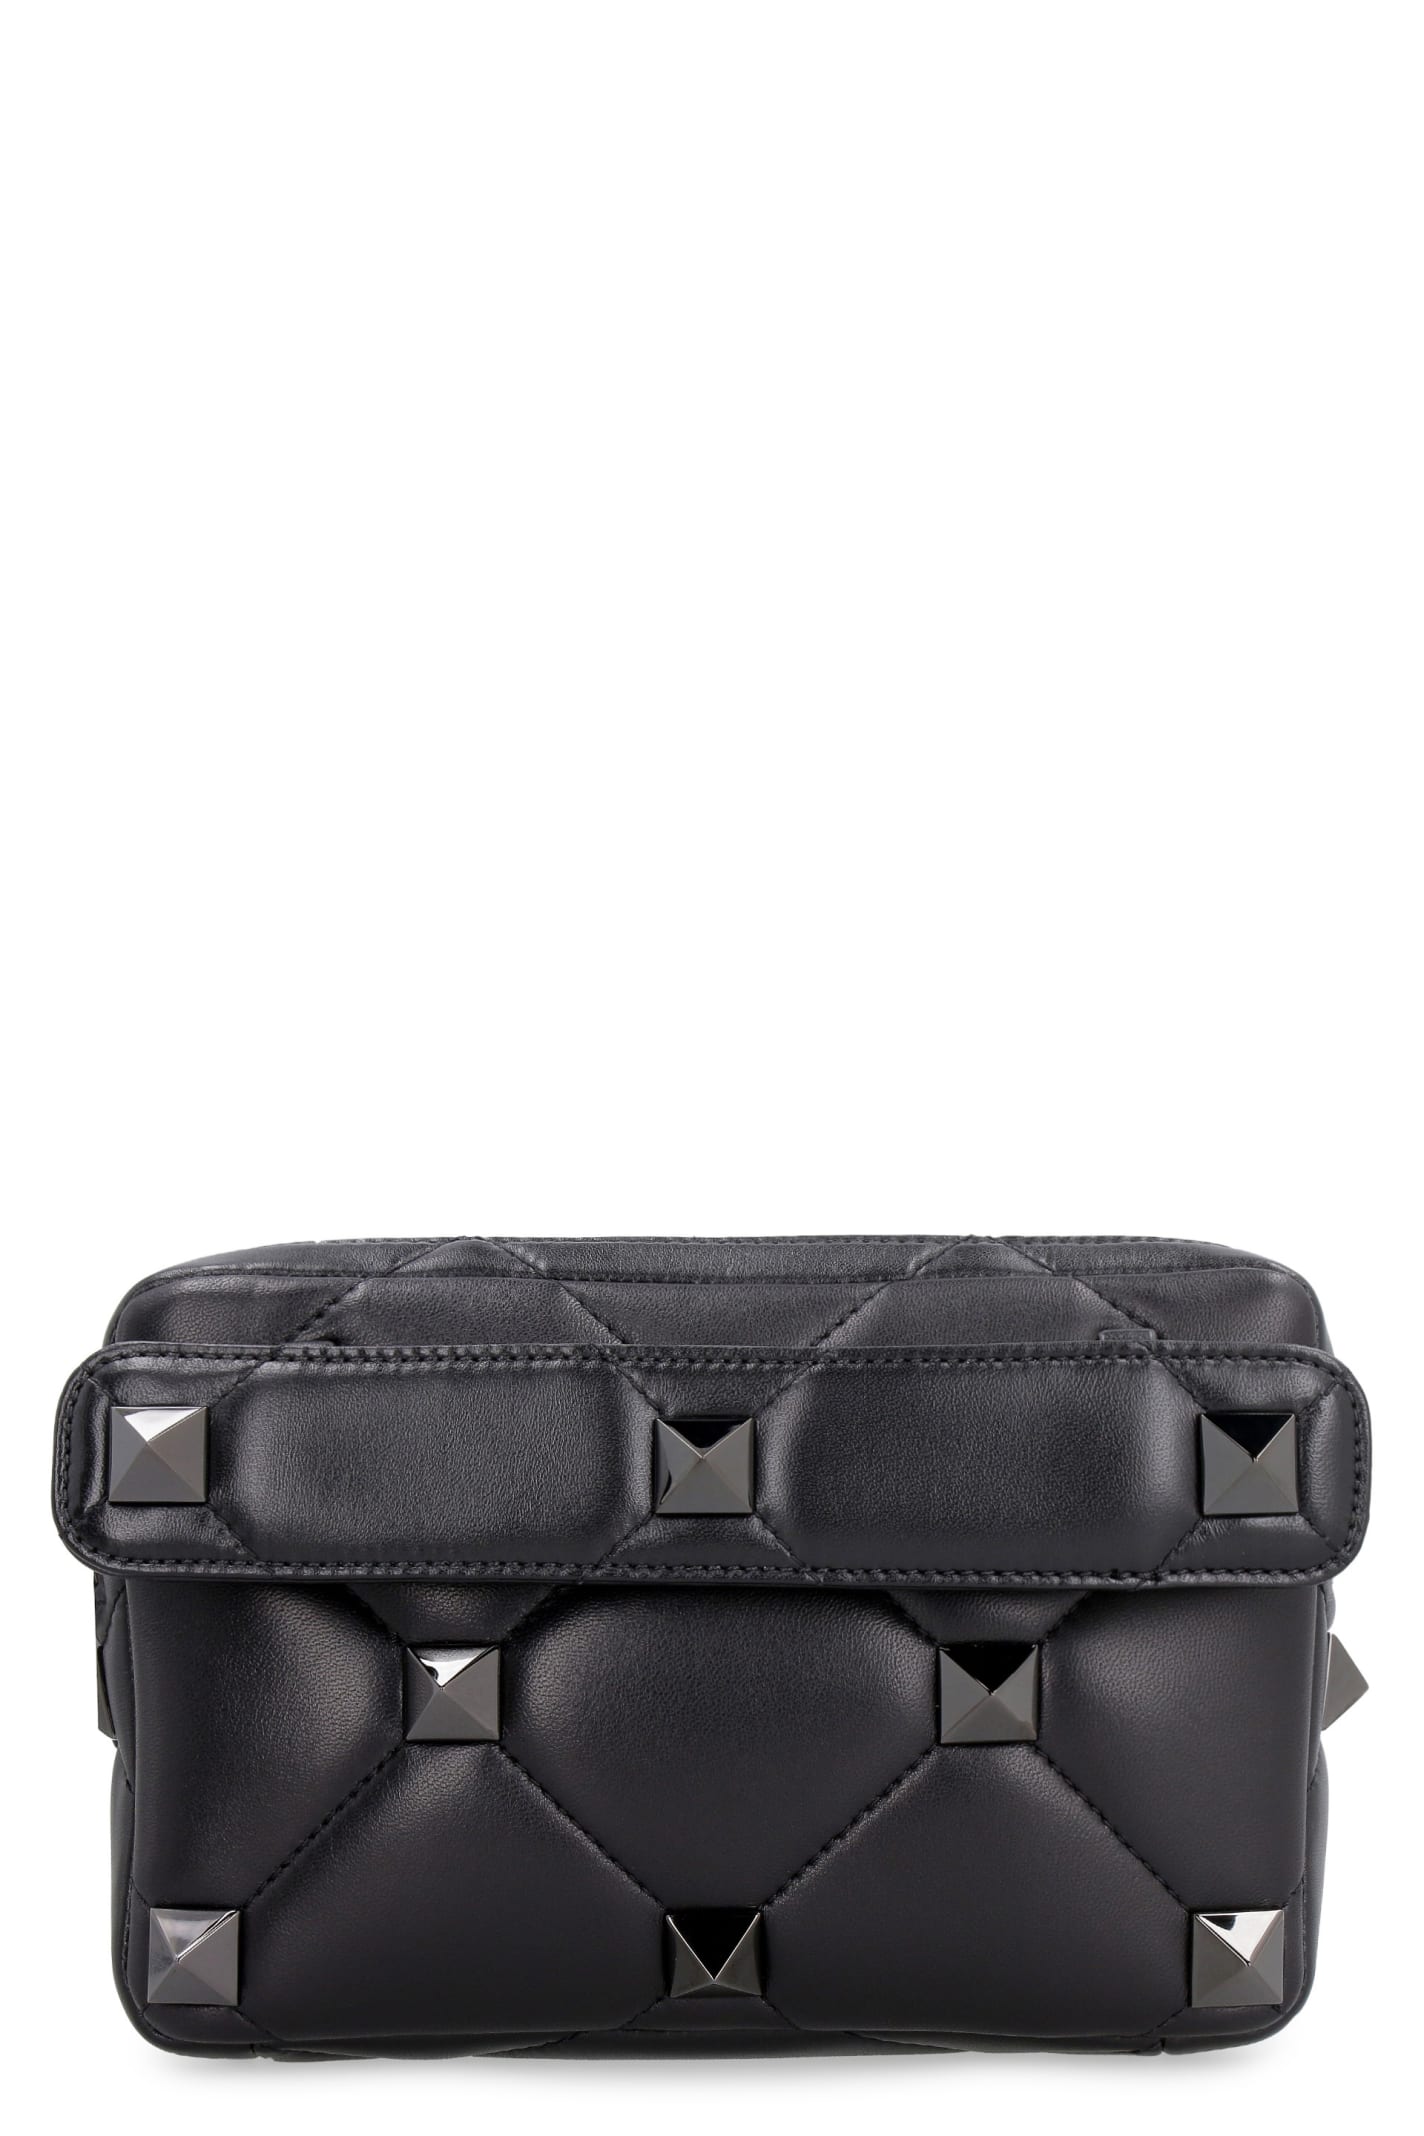 Shop Valentino Roman Stud Quilted Leather Shoulder Bag In Nero